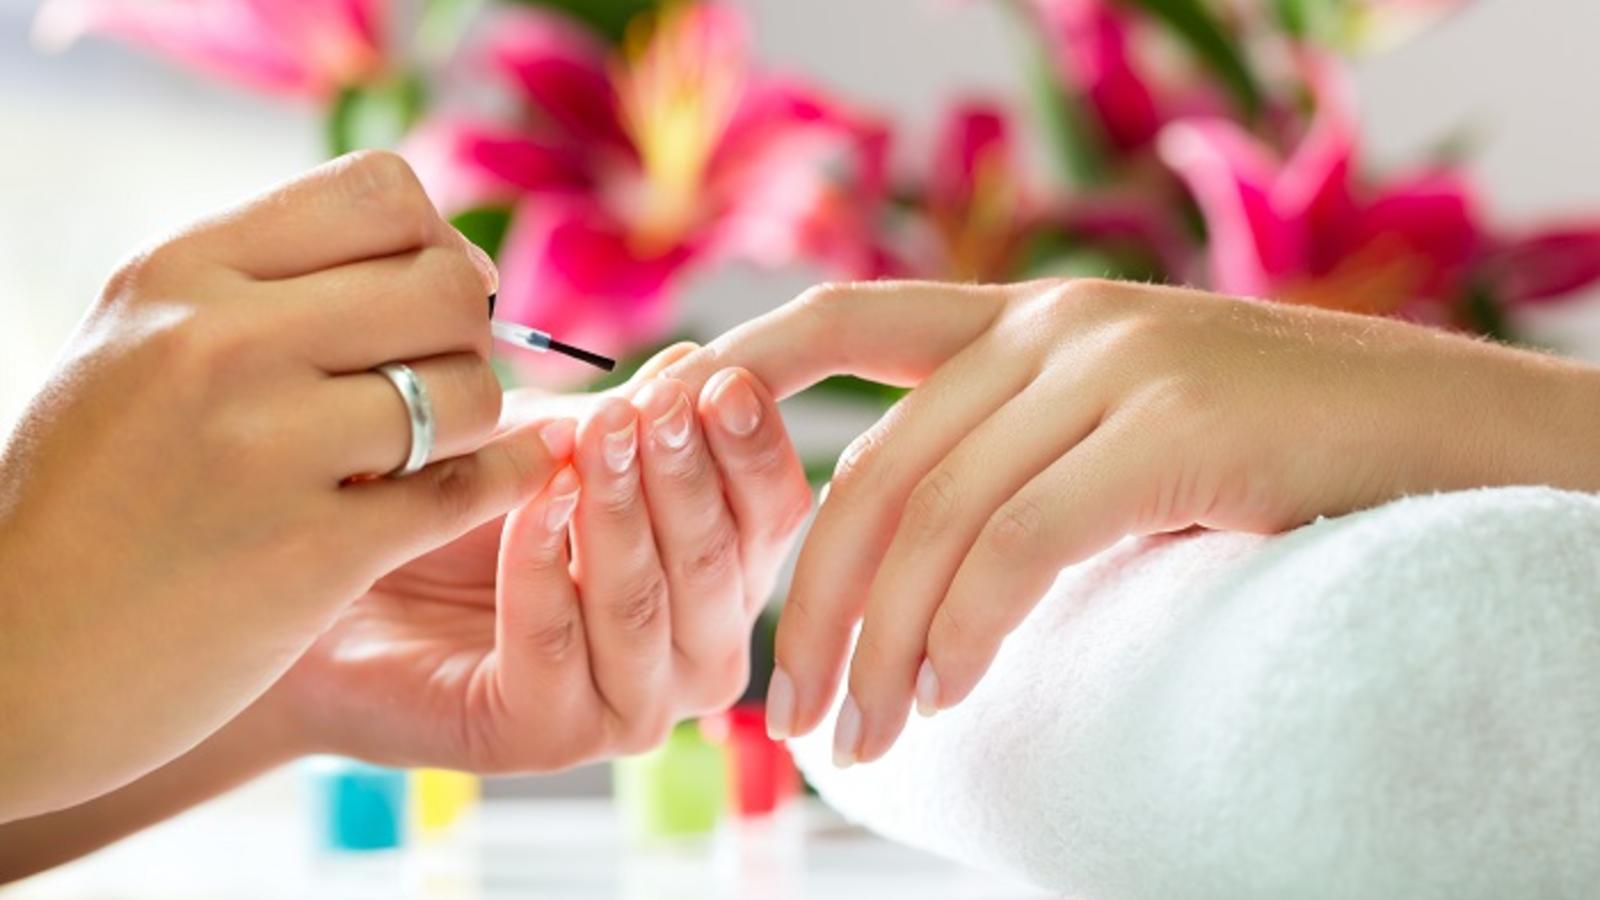 1. Nail Technician Jobs in Singapore - wide 4